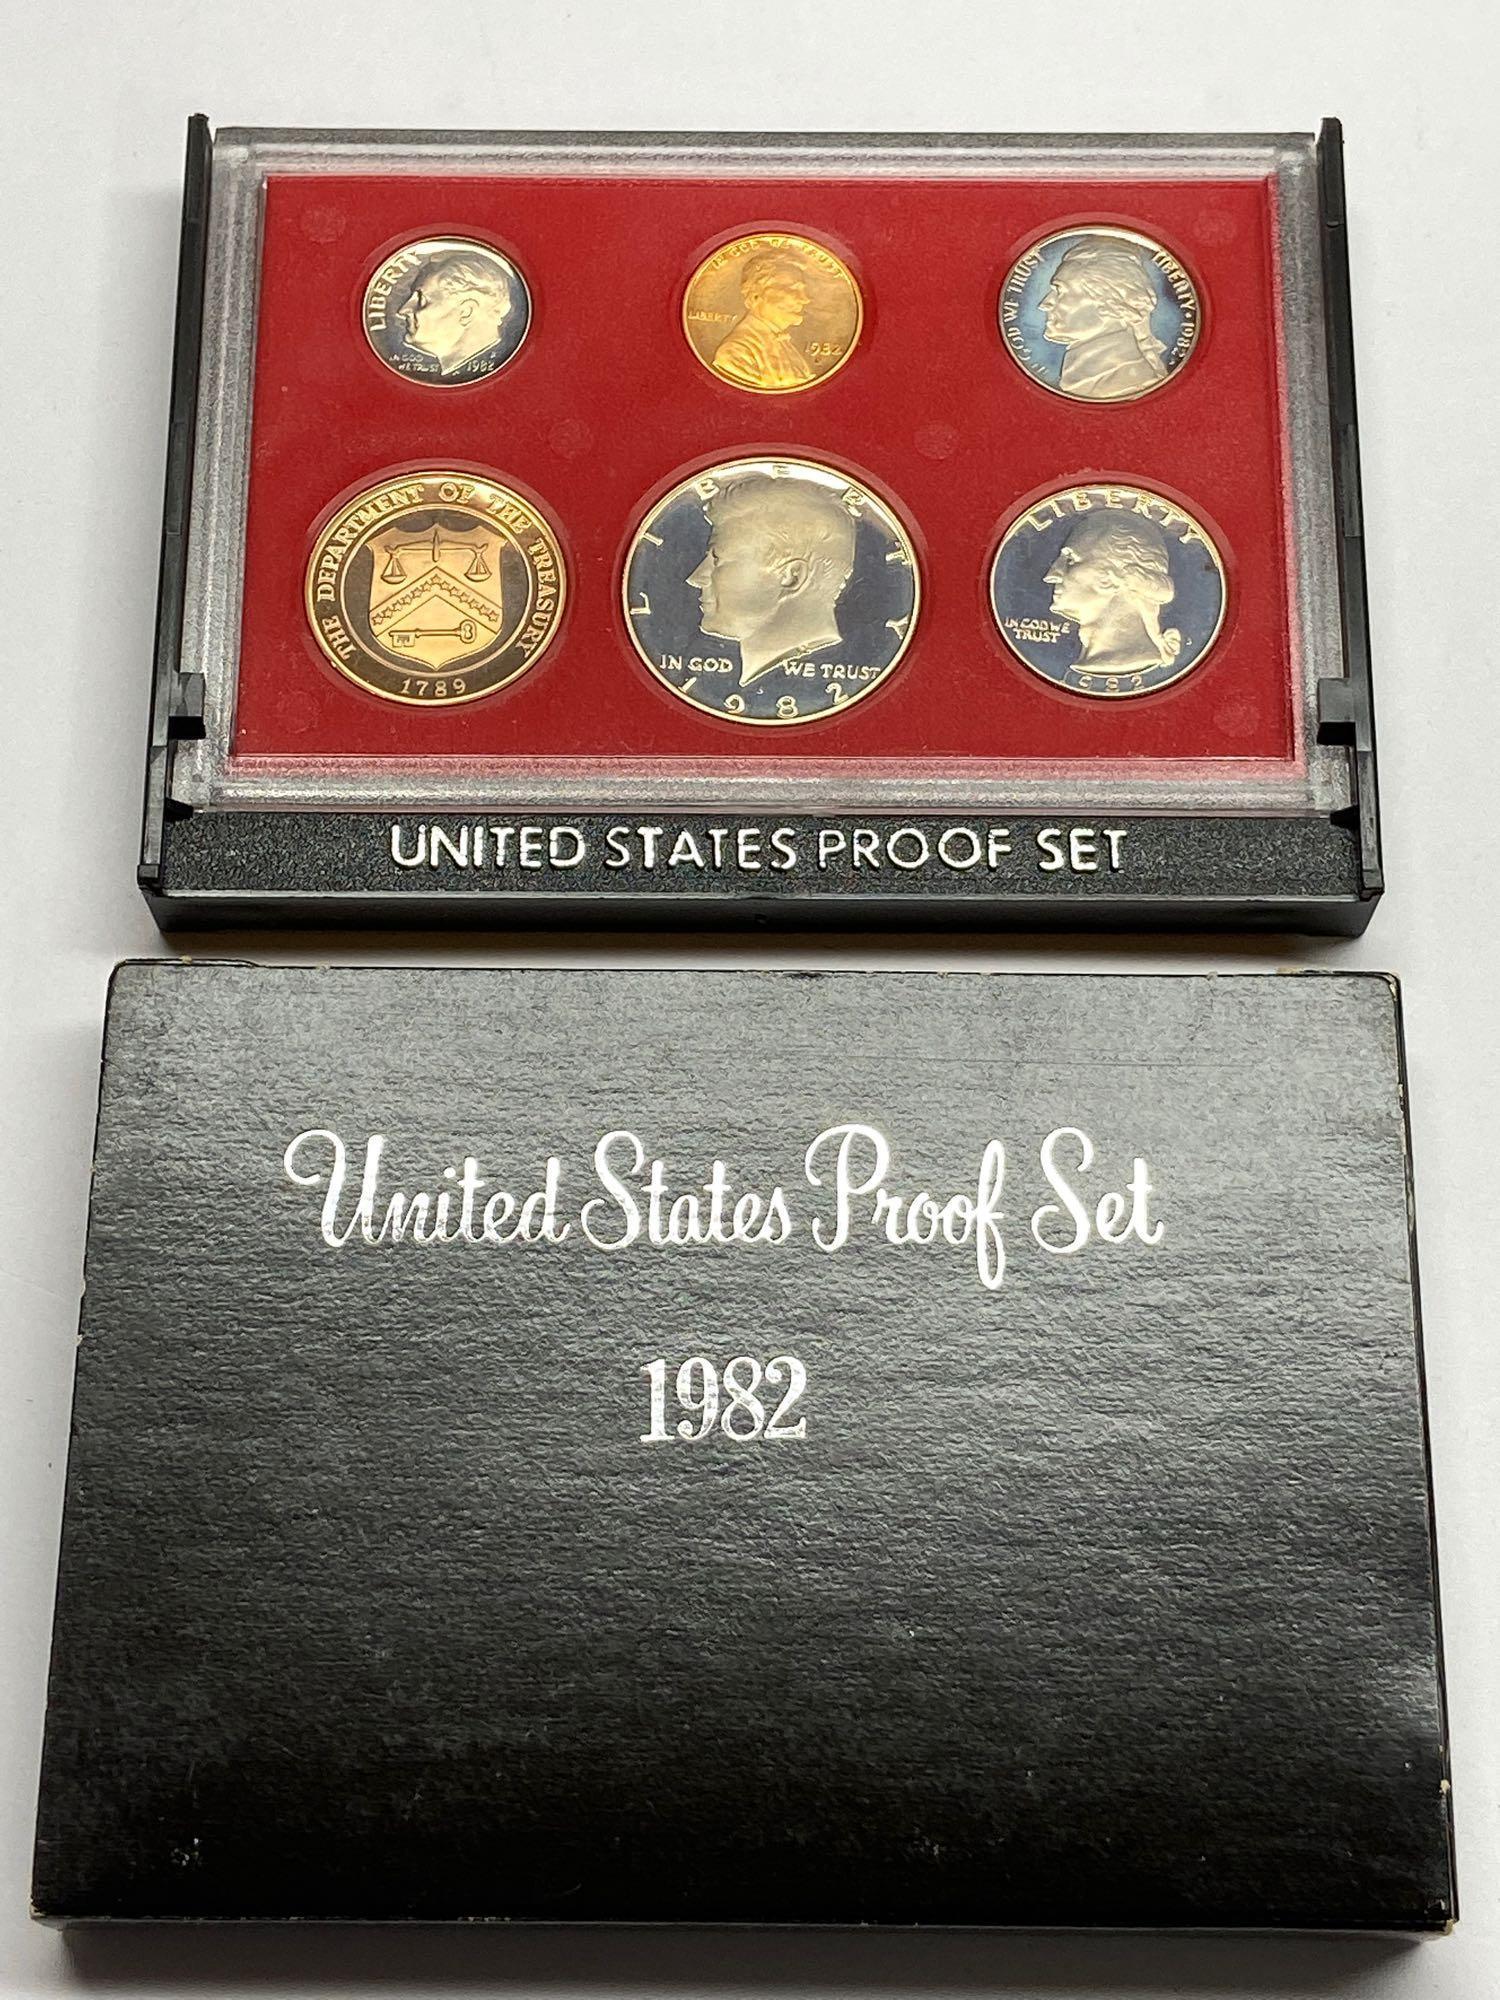 Collection of 8 United States Mint Proof Sets of Coins 1971-1992 in Original Packaging